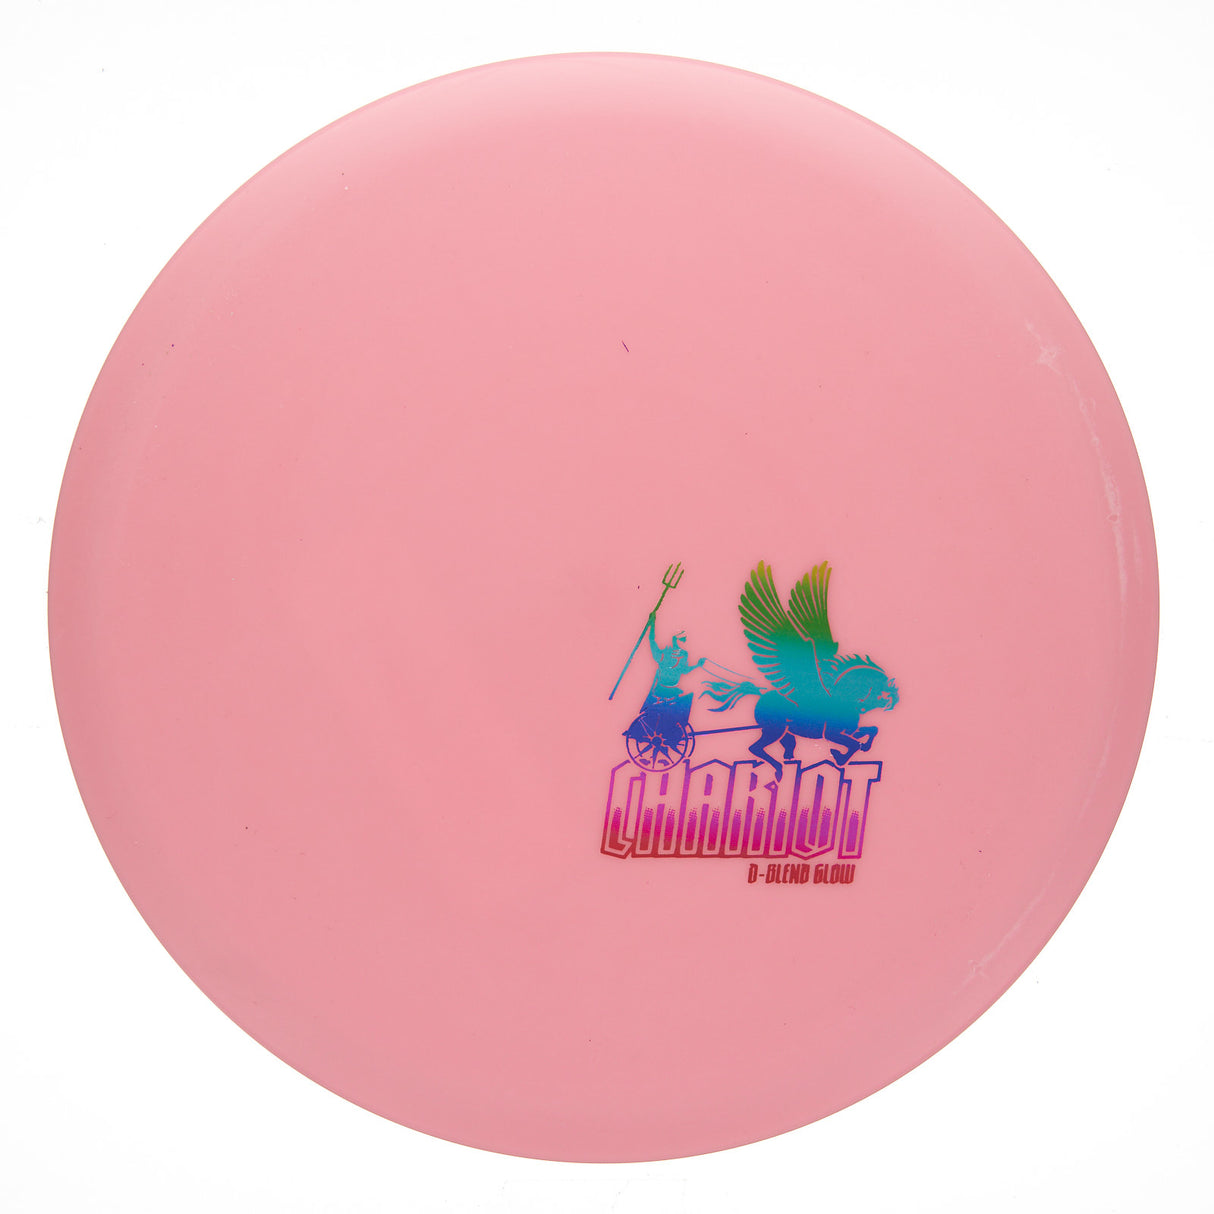 Infinite Discs Chariot - D-Blend Glow 179g | Style 0001